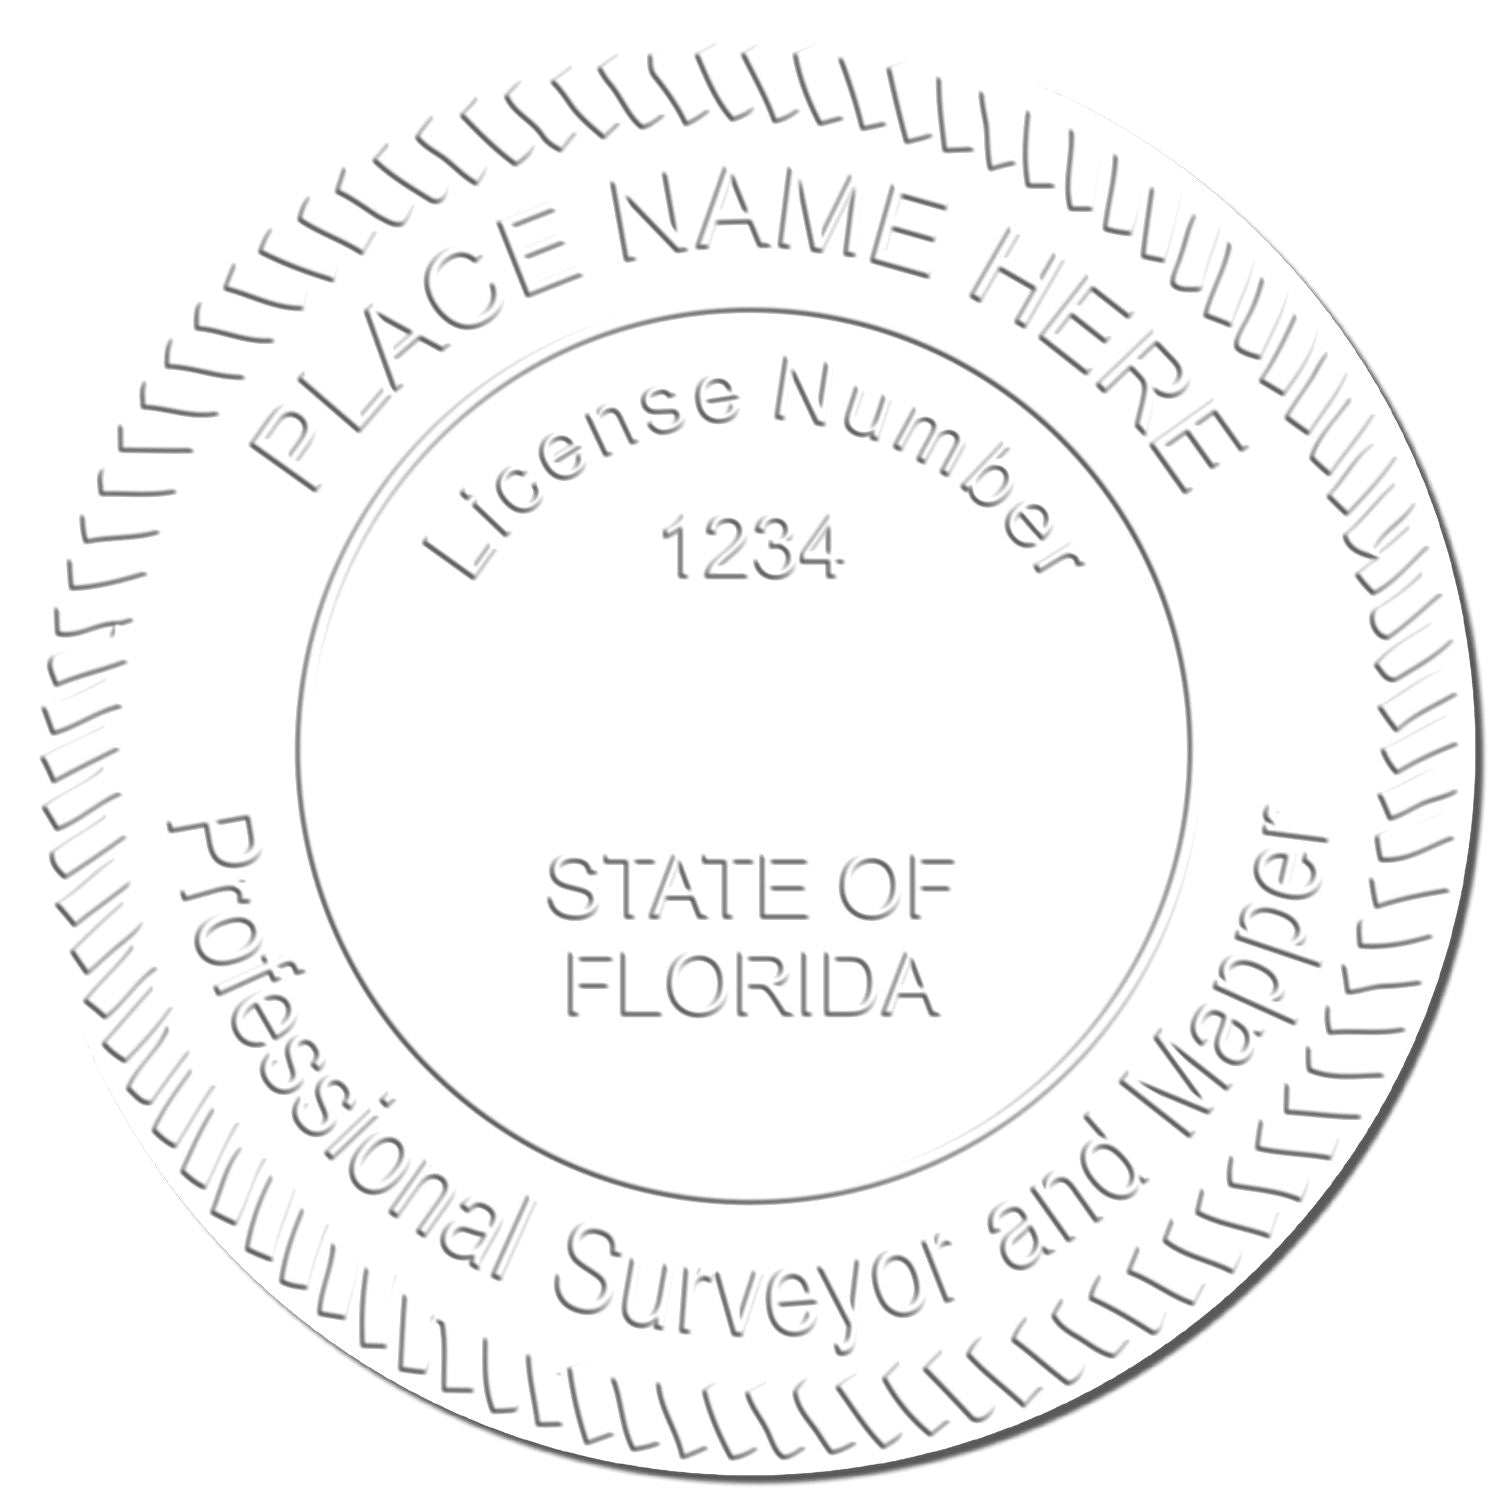 The main image for the Long Reach Florida Land Surveyor Seal depicting a sample of the imprint and electronic files